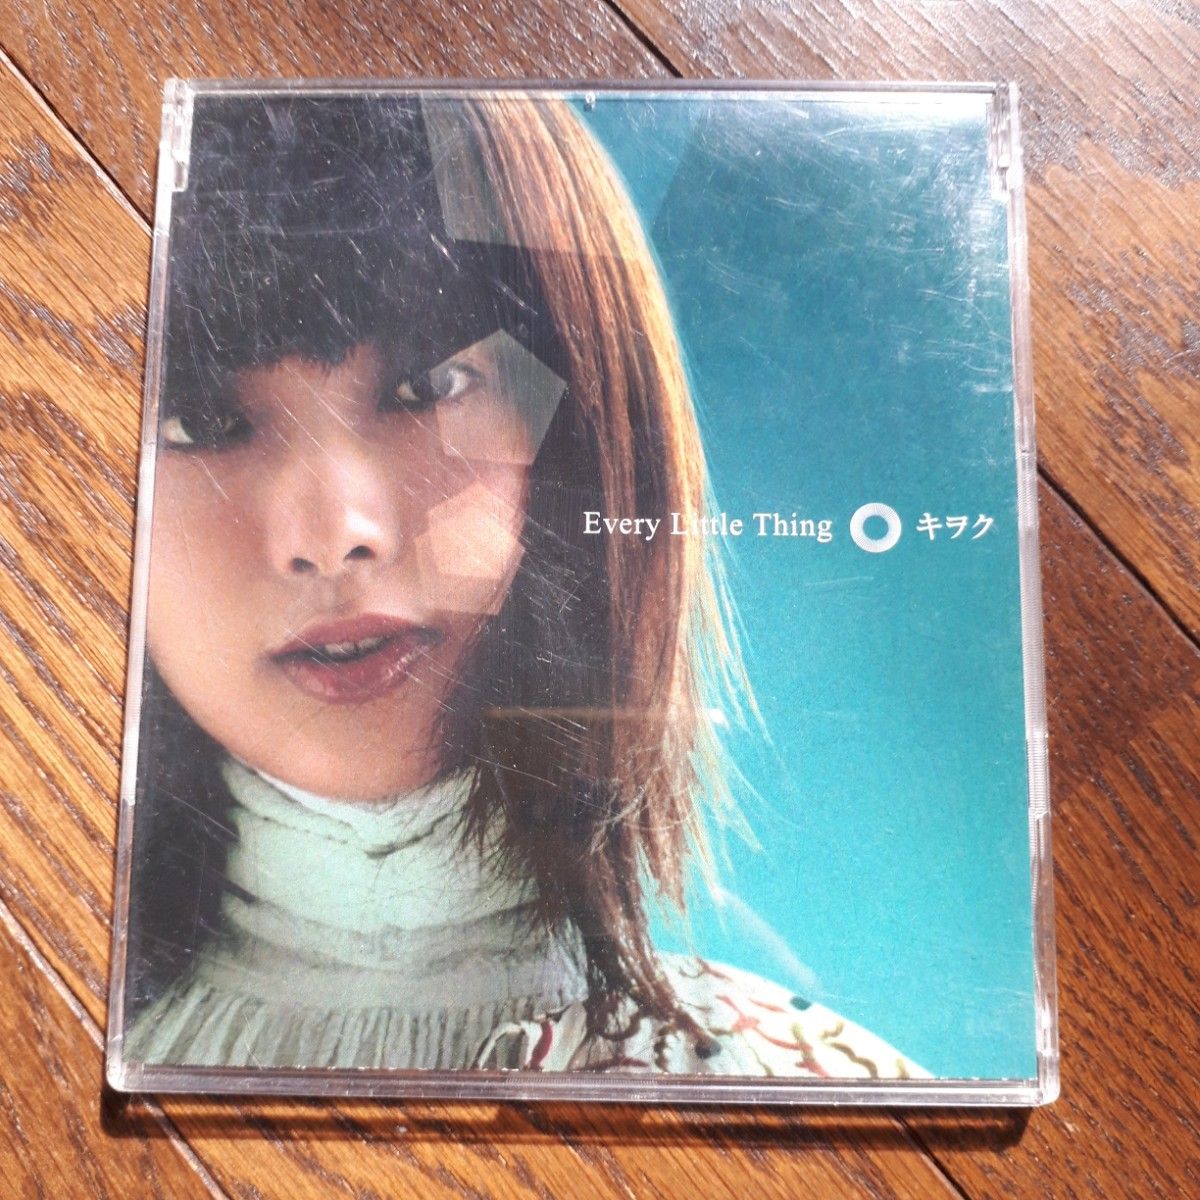 Every Little Thing/キヲク マキシシングル CD